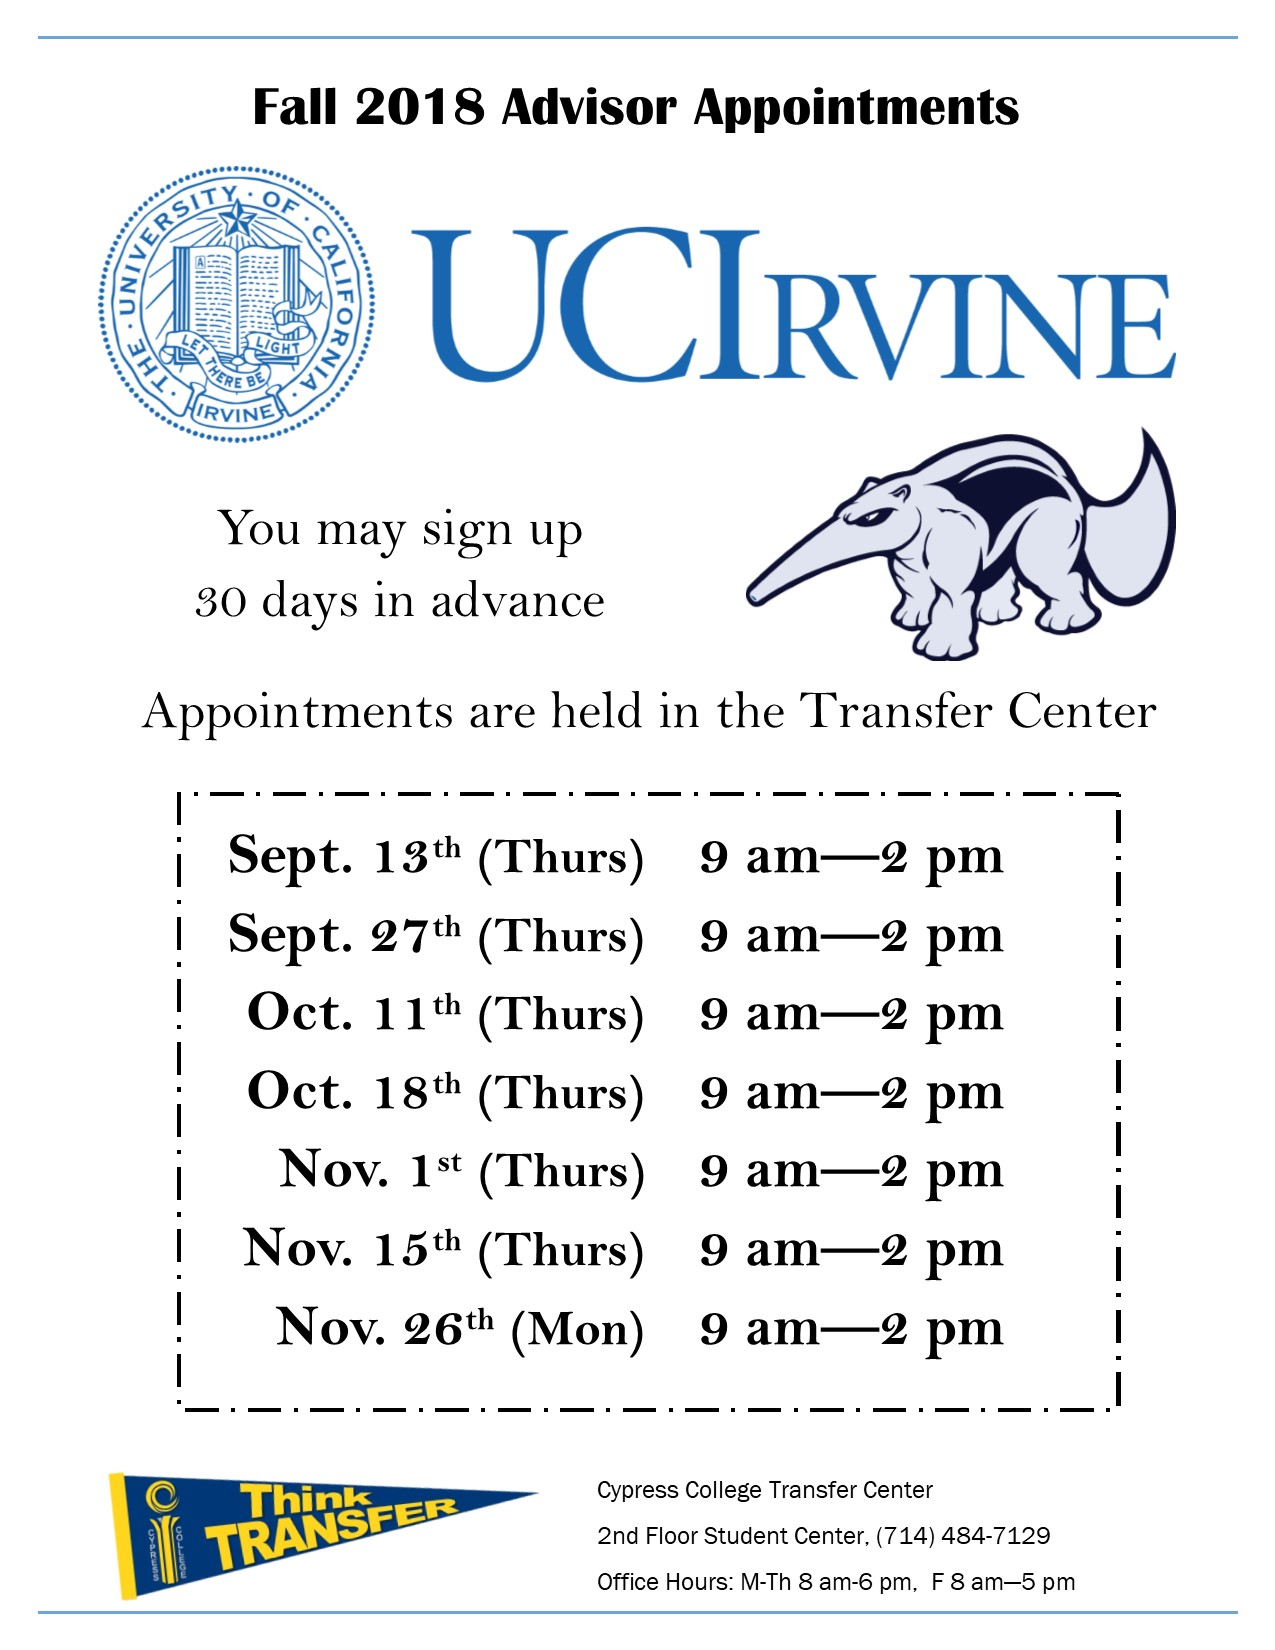 Fall 2018 Advisor Appointments UCIrvine flyer.